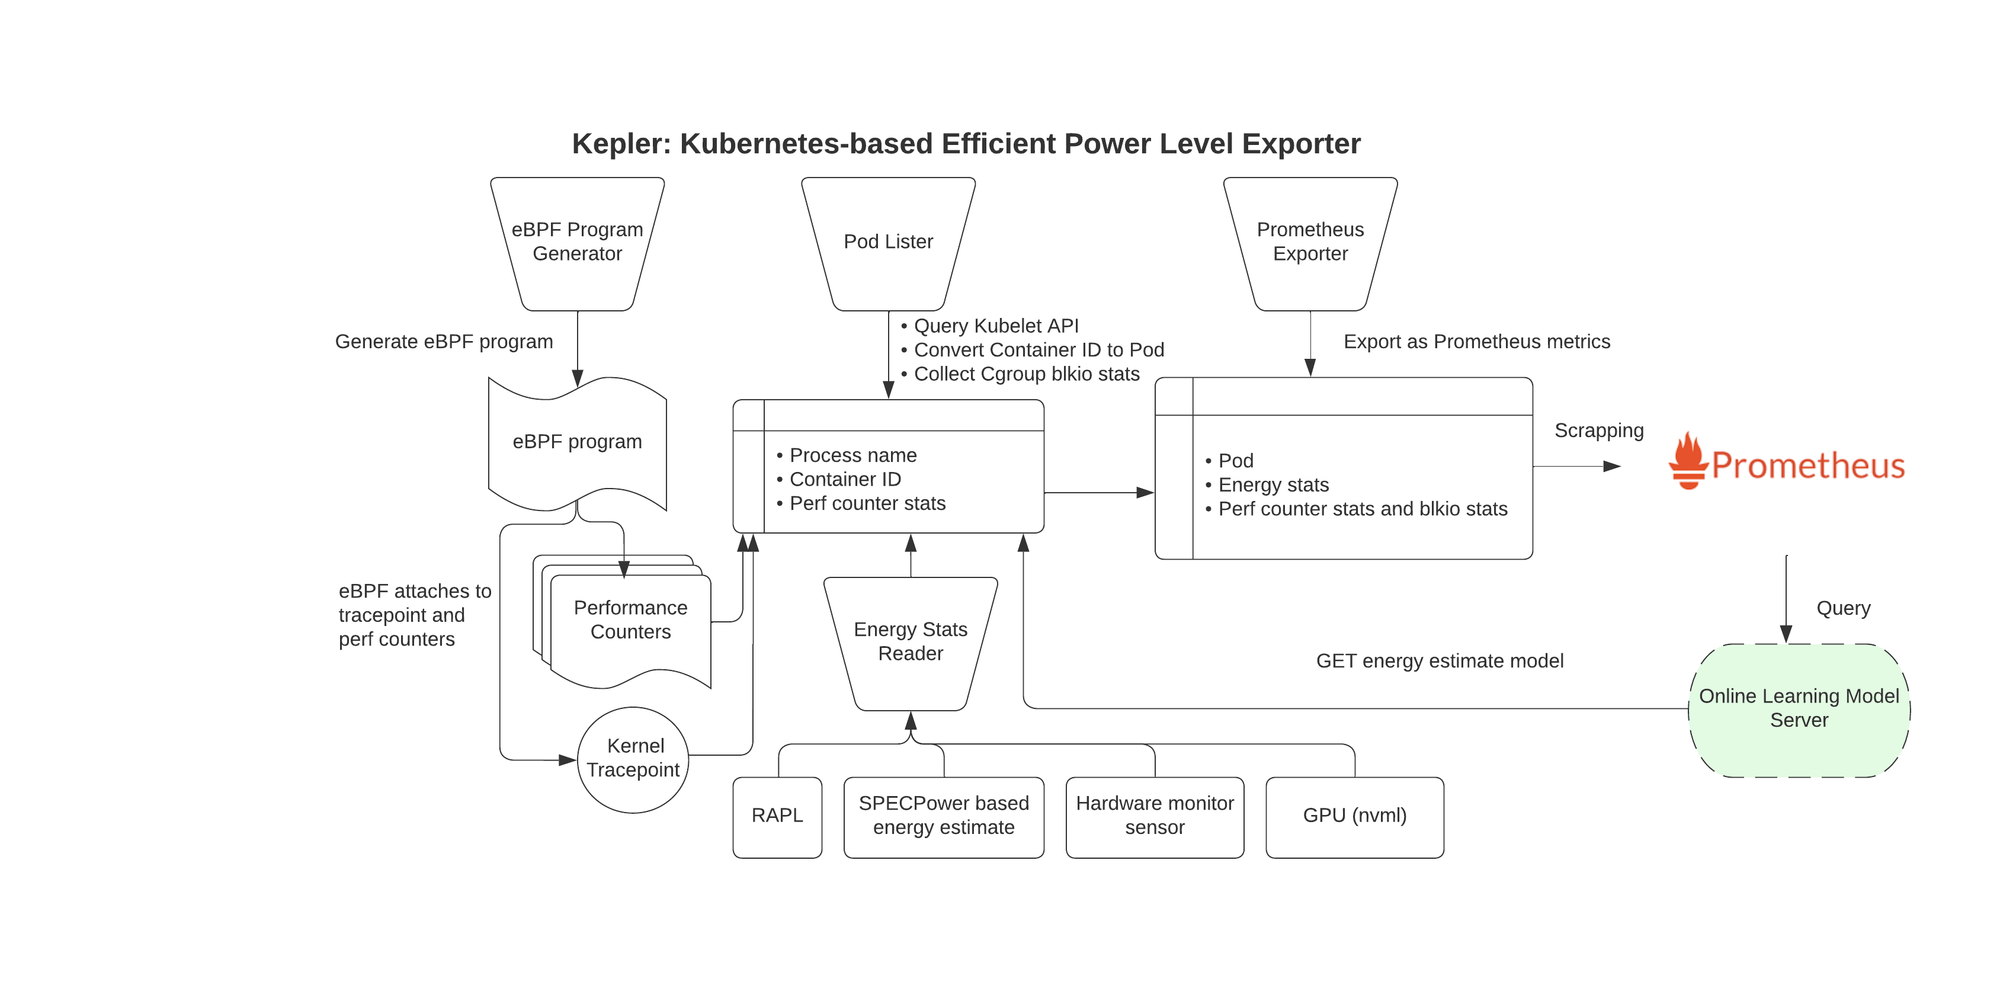 Flowchart diagram showing Kepler’s architecture as a Kubernetes-based Efficient Power Level Exporter, detailing components such as eBPF Program Generator, Kernel Transport, Preferences Configuration, Pod List, Container ID to Pod Name process mapping within Kepler core that includes Process stats and Energy Stats Reader functions; outputs connect to Prometheus for data exportation and Online Learning Model for queries.